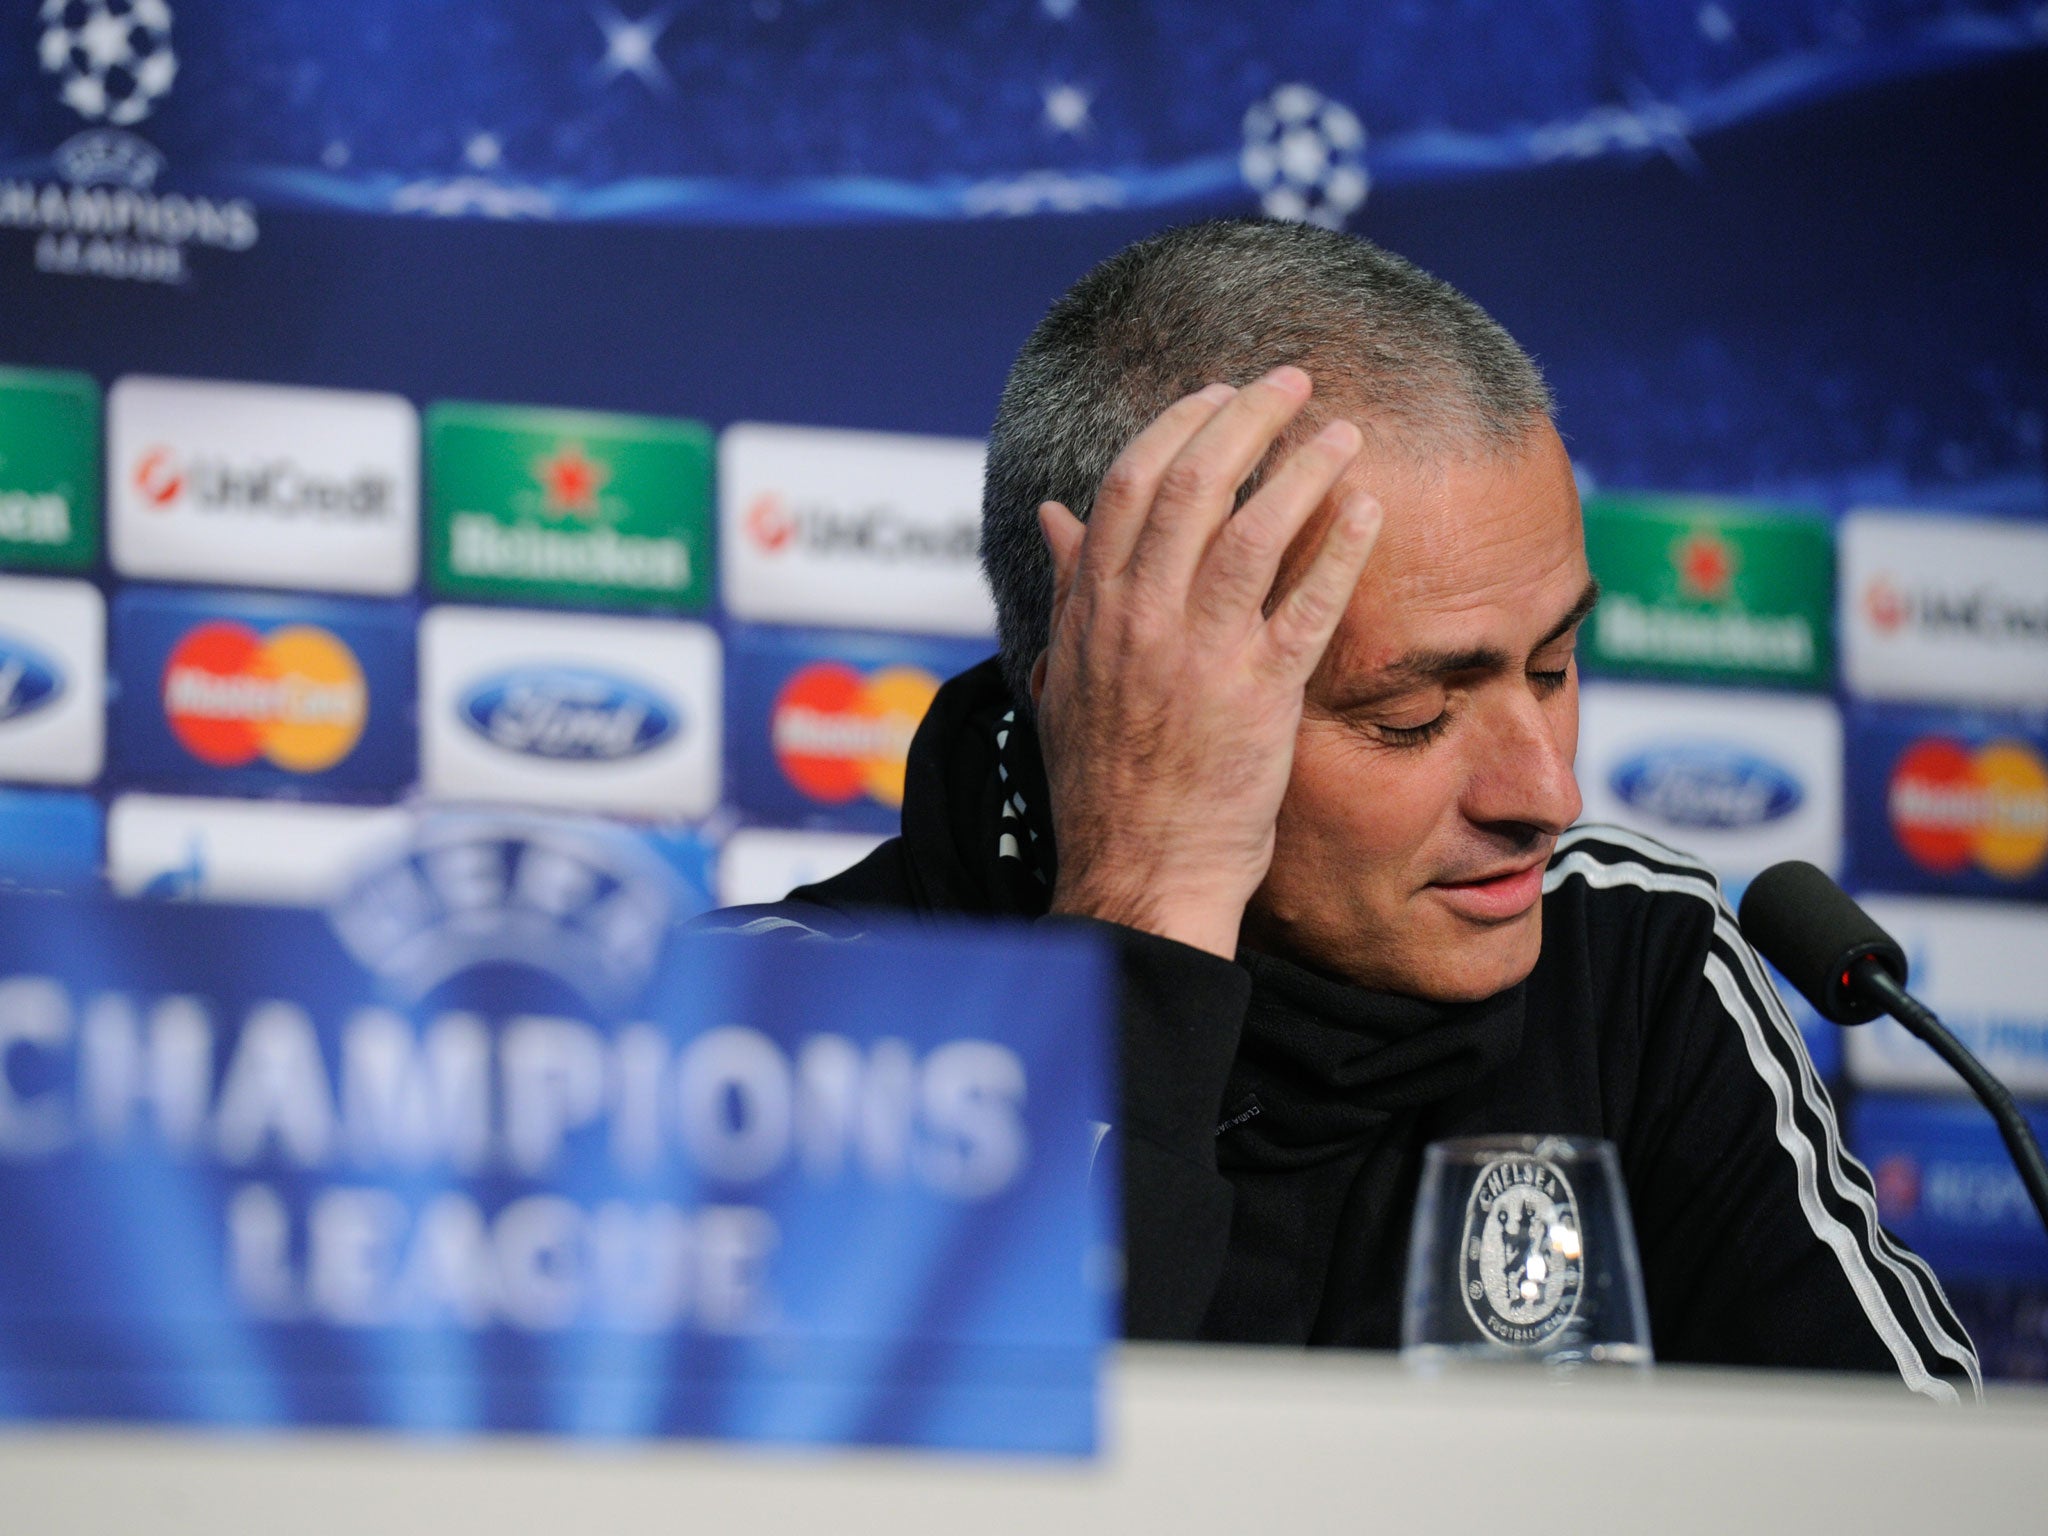 Jose Mourinho showed off his latest hair style to the public ahead of the Champions league match with Basle